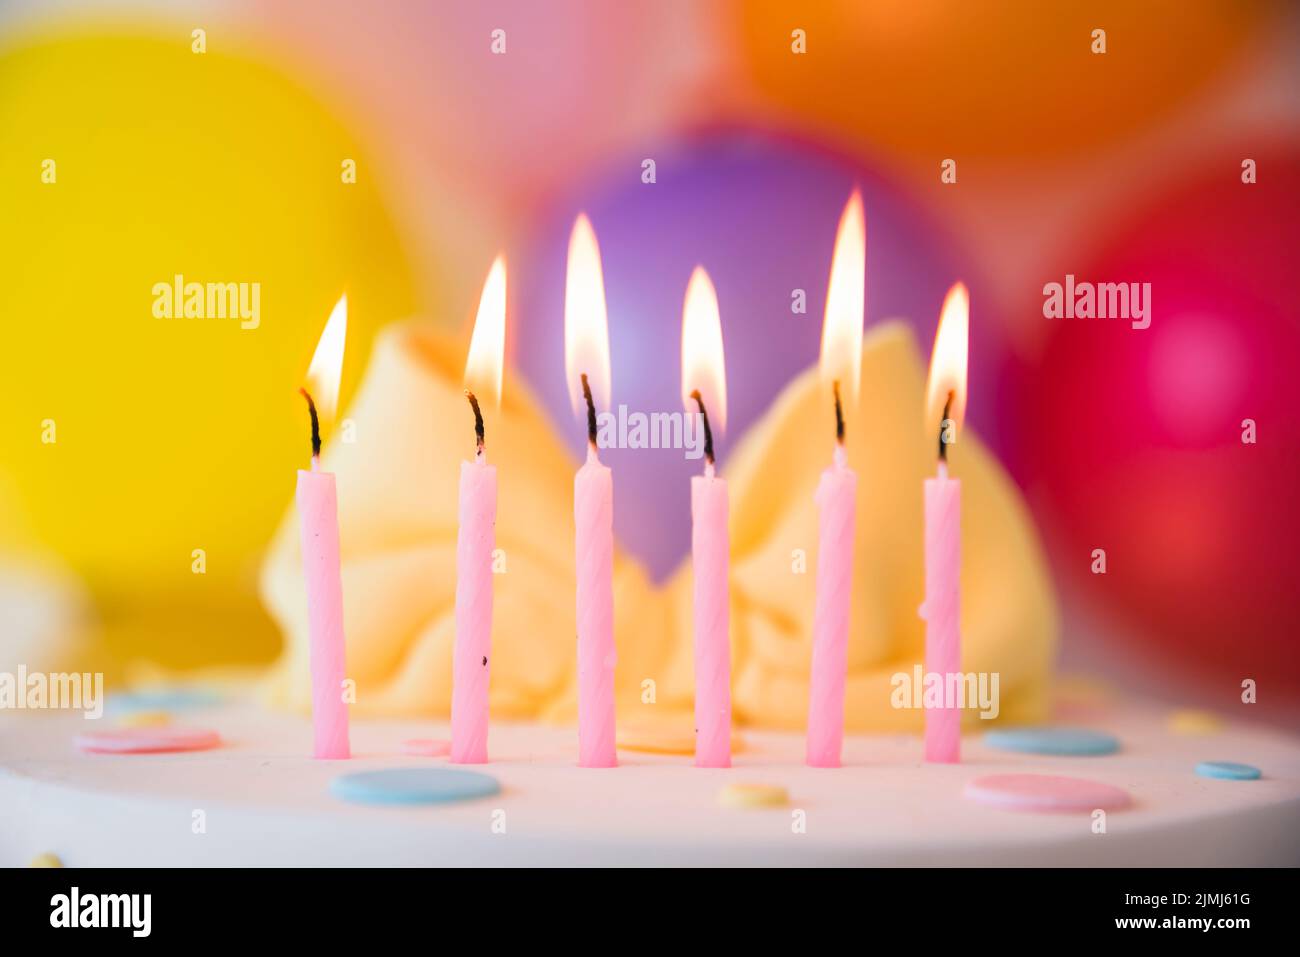 Birthday cake with candles Stock Photo